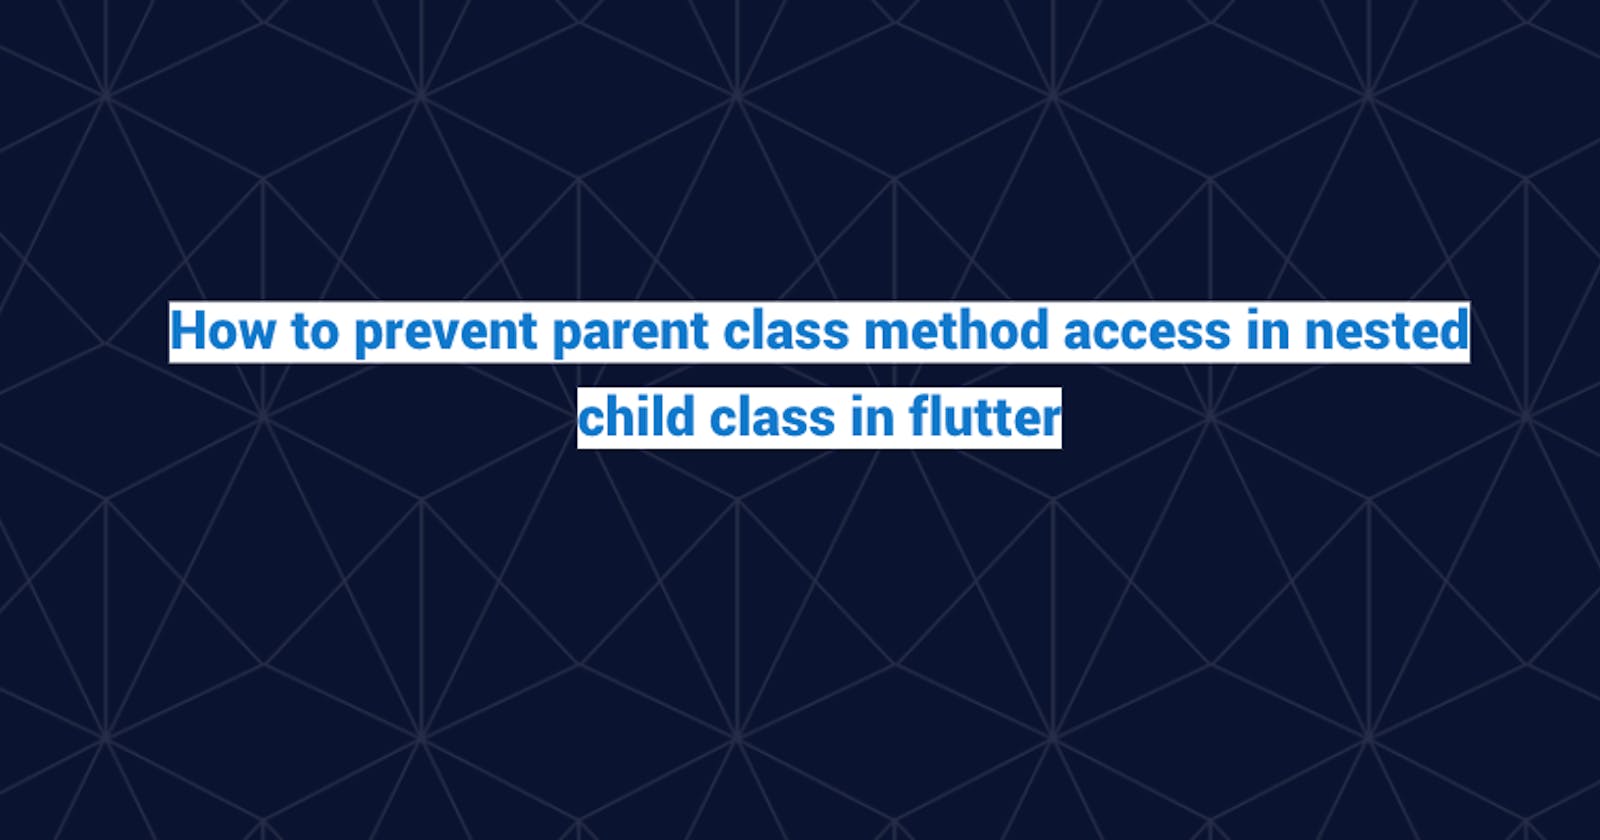 How to prevent parent class method access in nested child class in the flutter